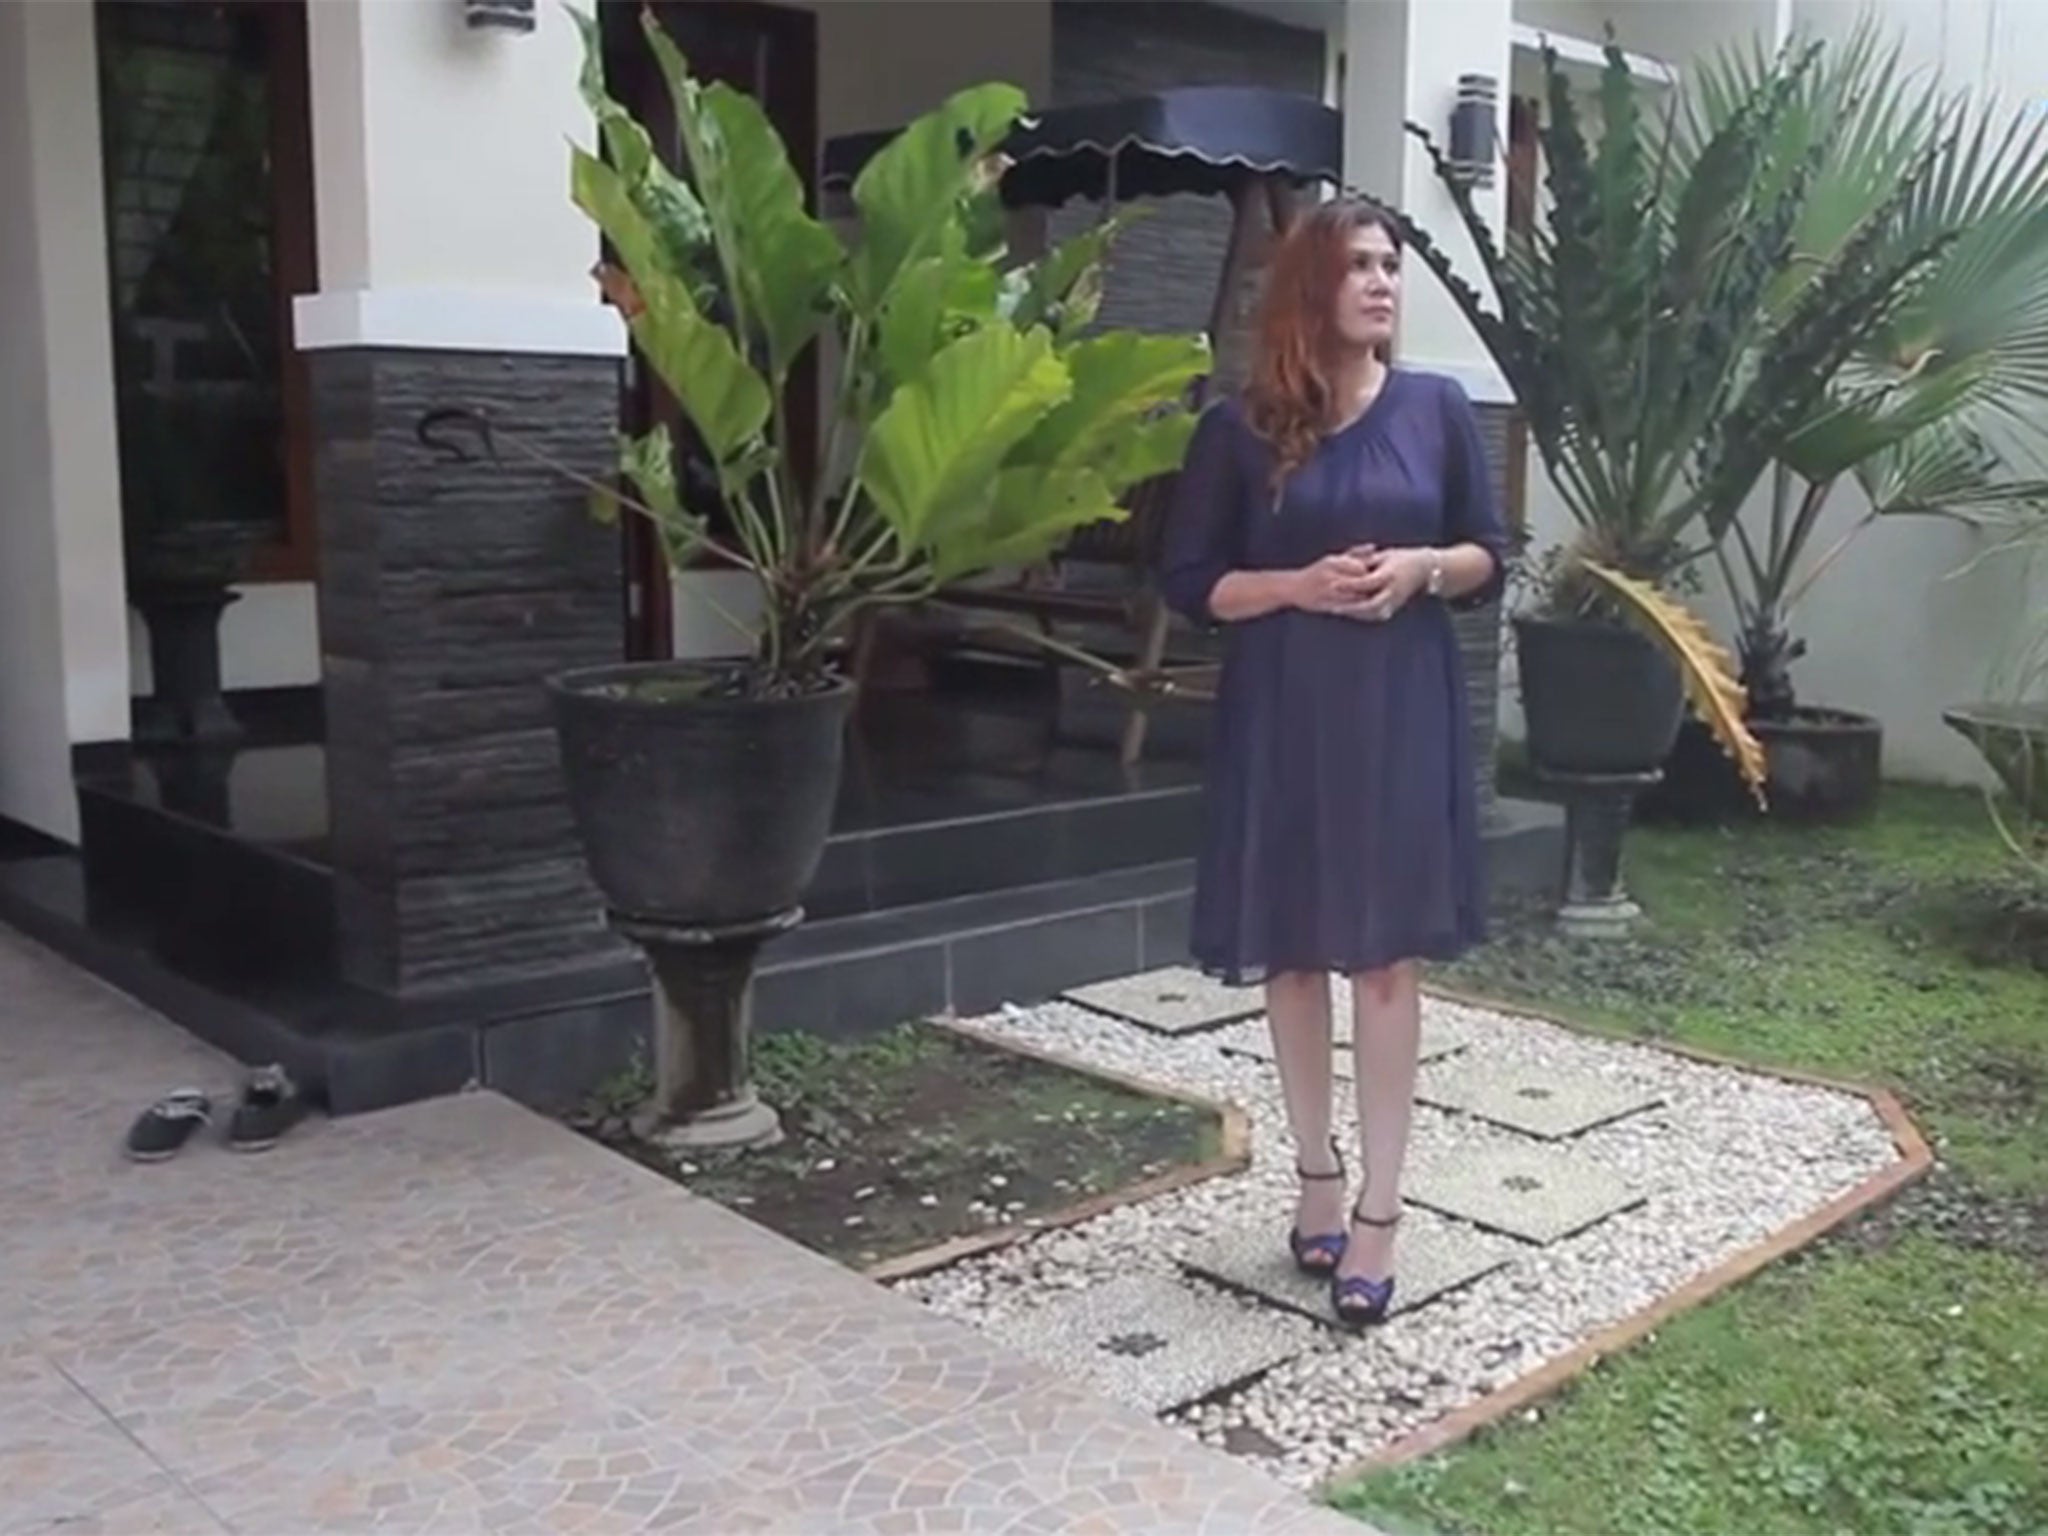 Wina Lia in an interview with Indonesia's Tribun Jogja, posted on YouTube